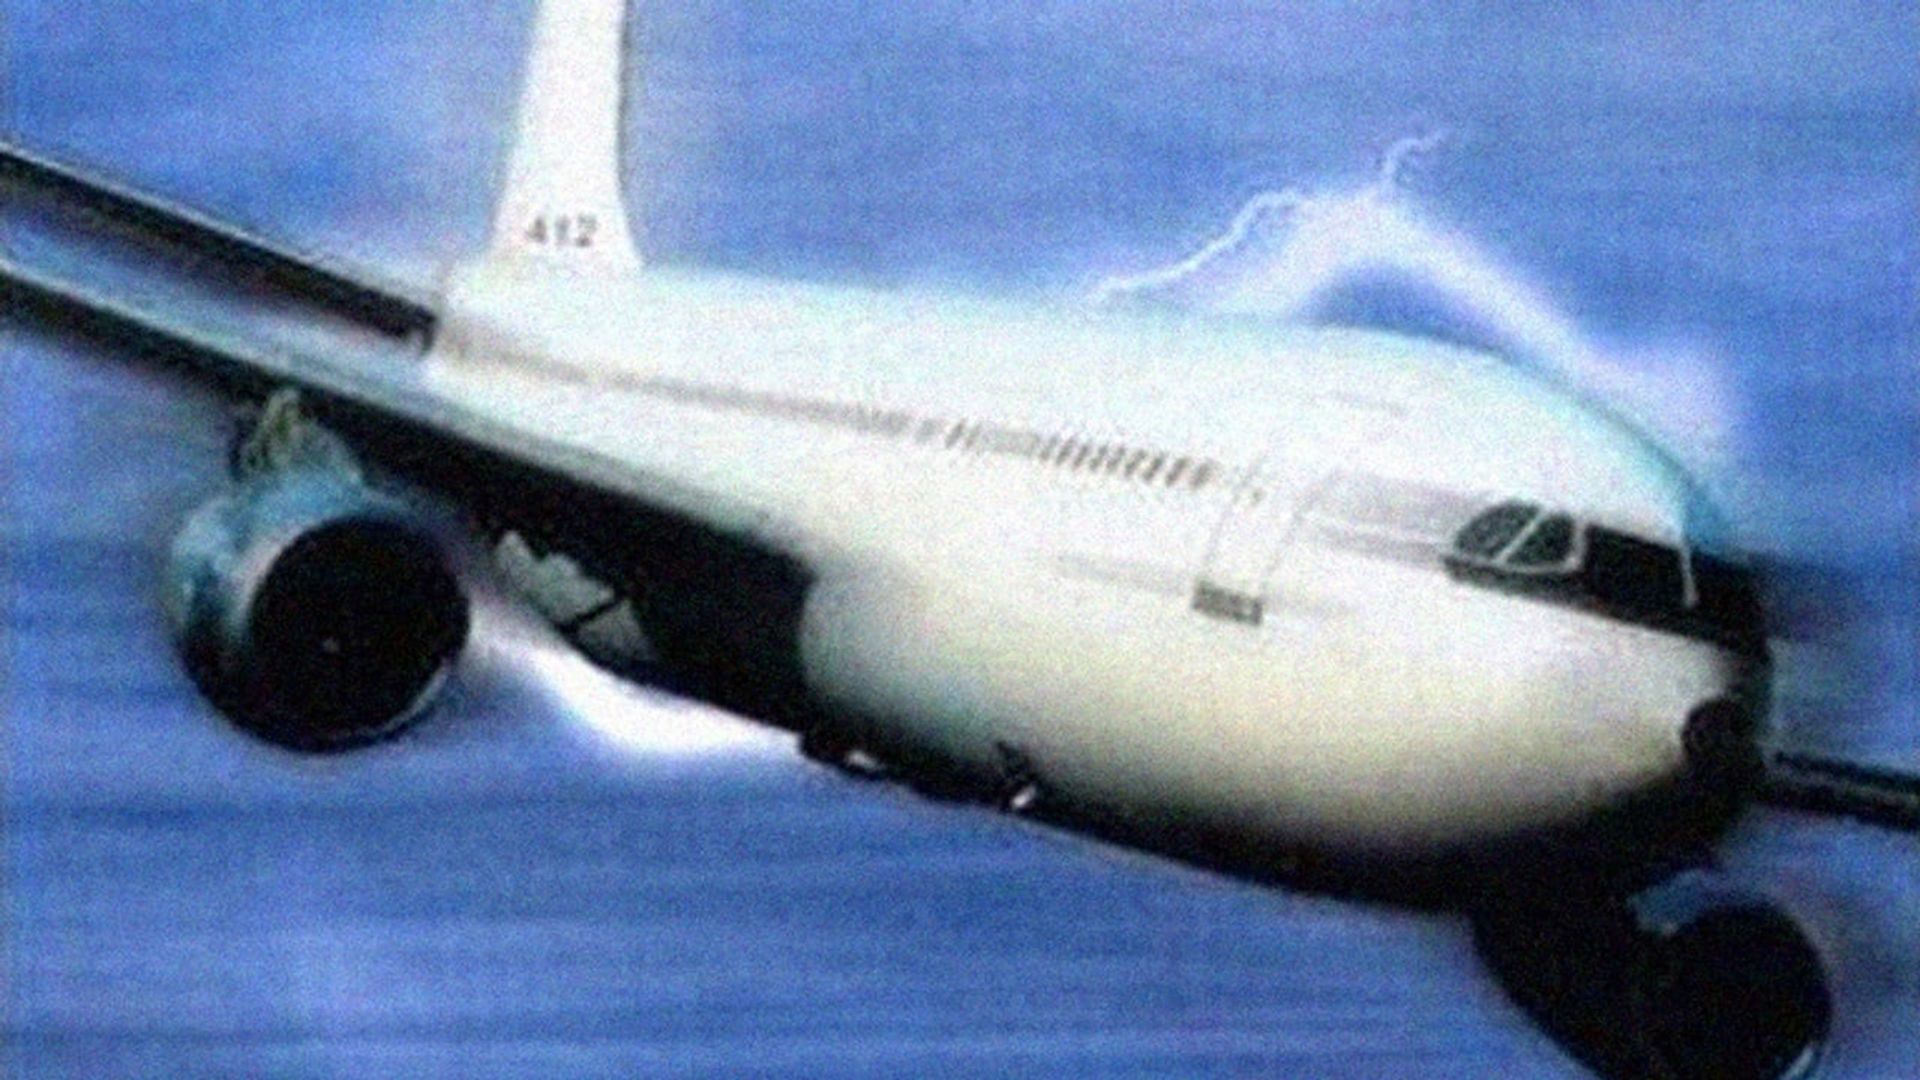 The Disappearance of Flight 412 background